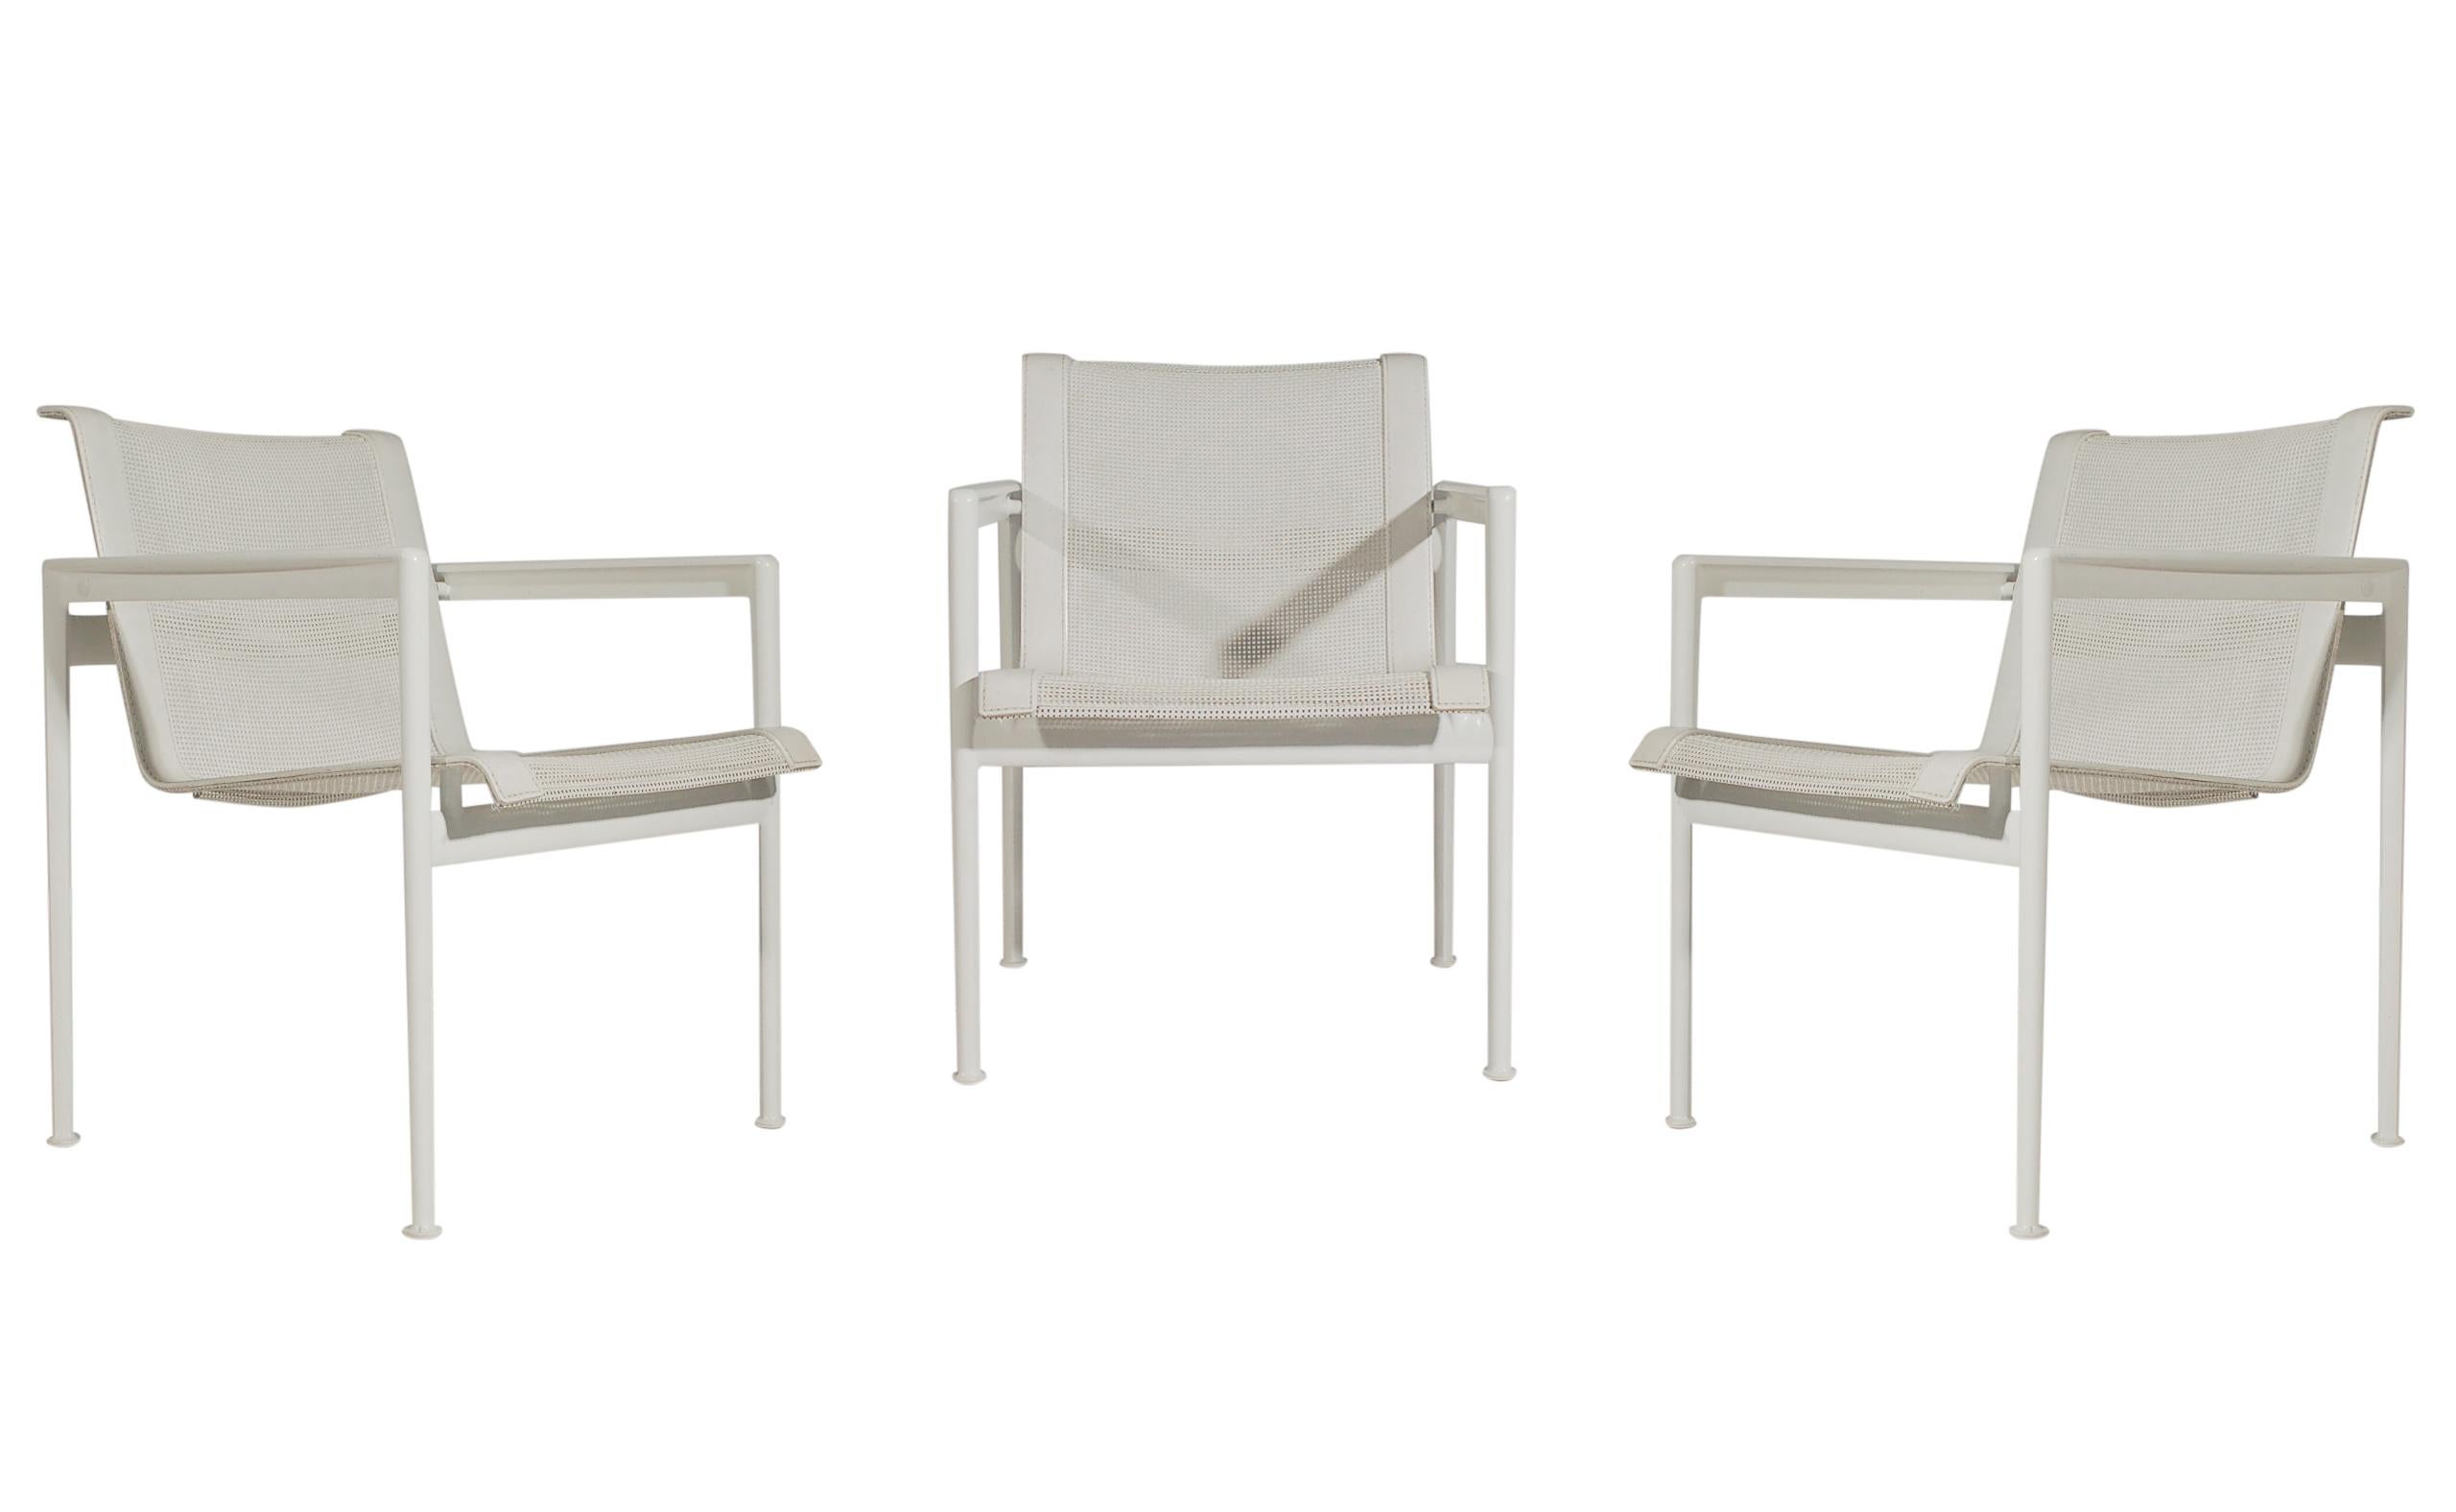 Contemporary Mid-Century Modern White Patio Chairs and Table Set by Richard Schultz for Knoll